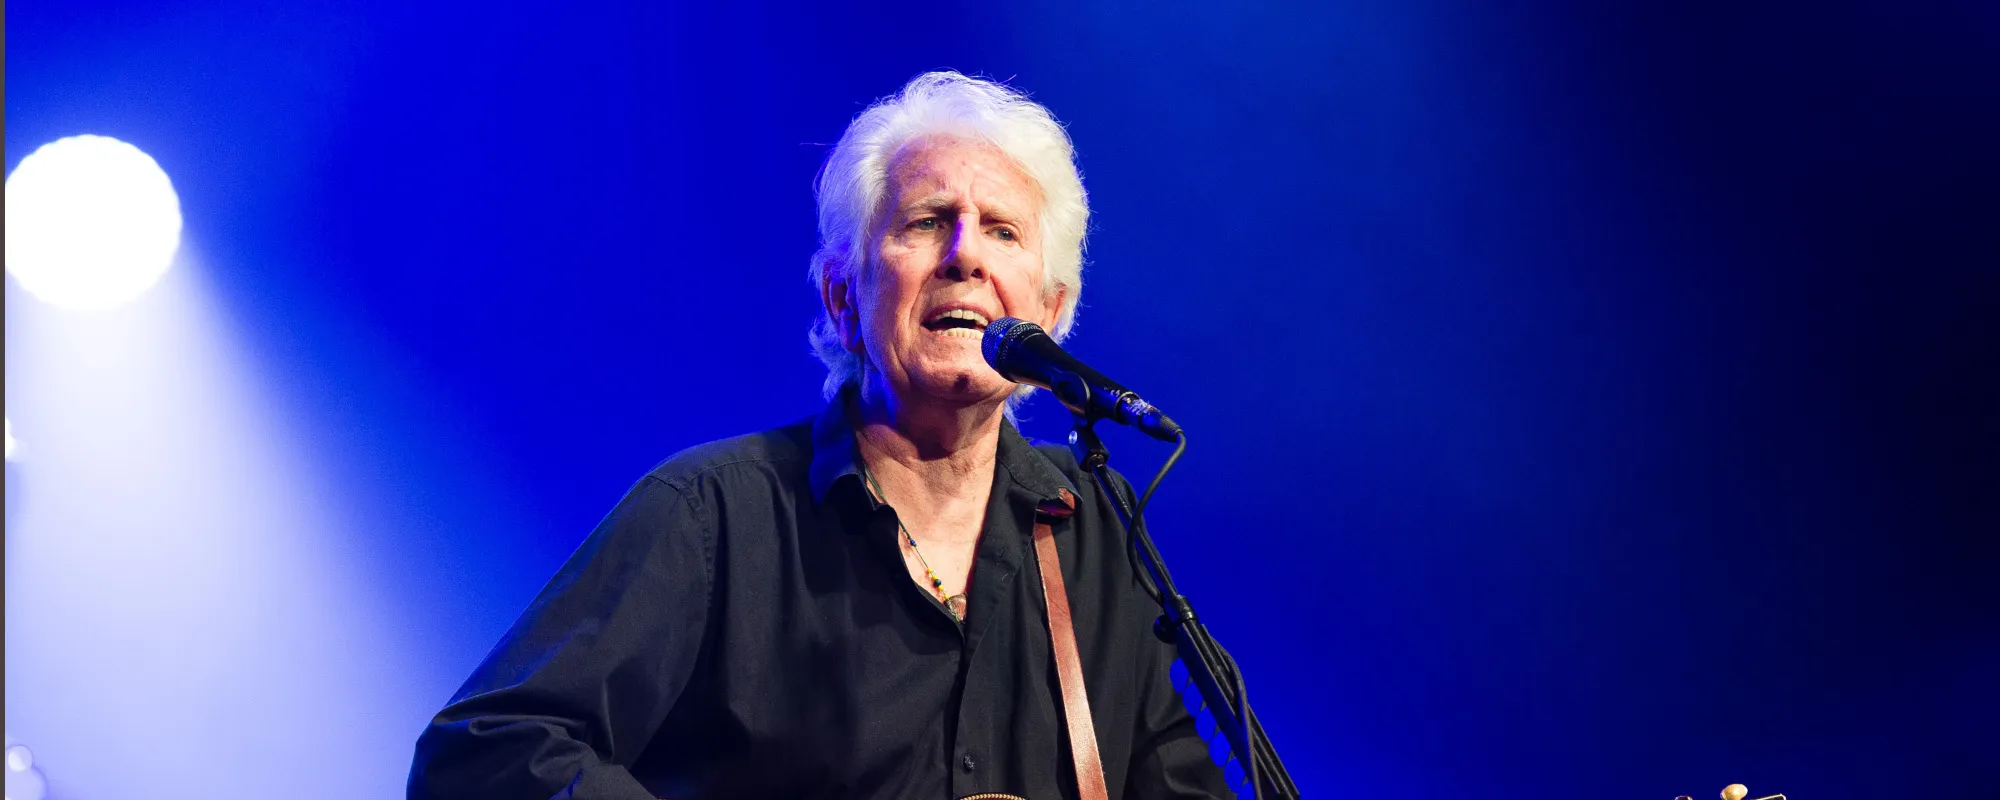 Graham Nash, Bruce Hornsby, Natalie Merchant, and More to Perform The Music of Paul McCartney at Tribute Show